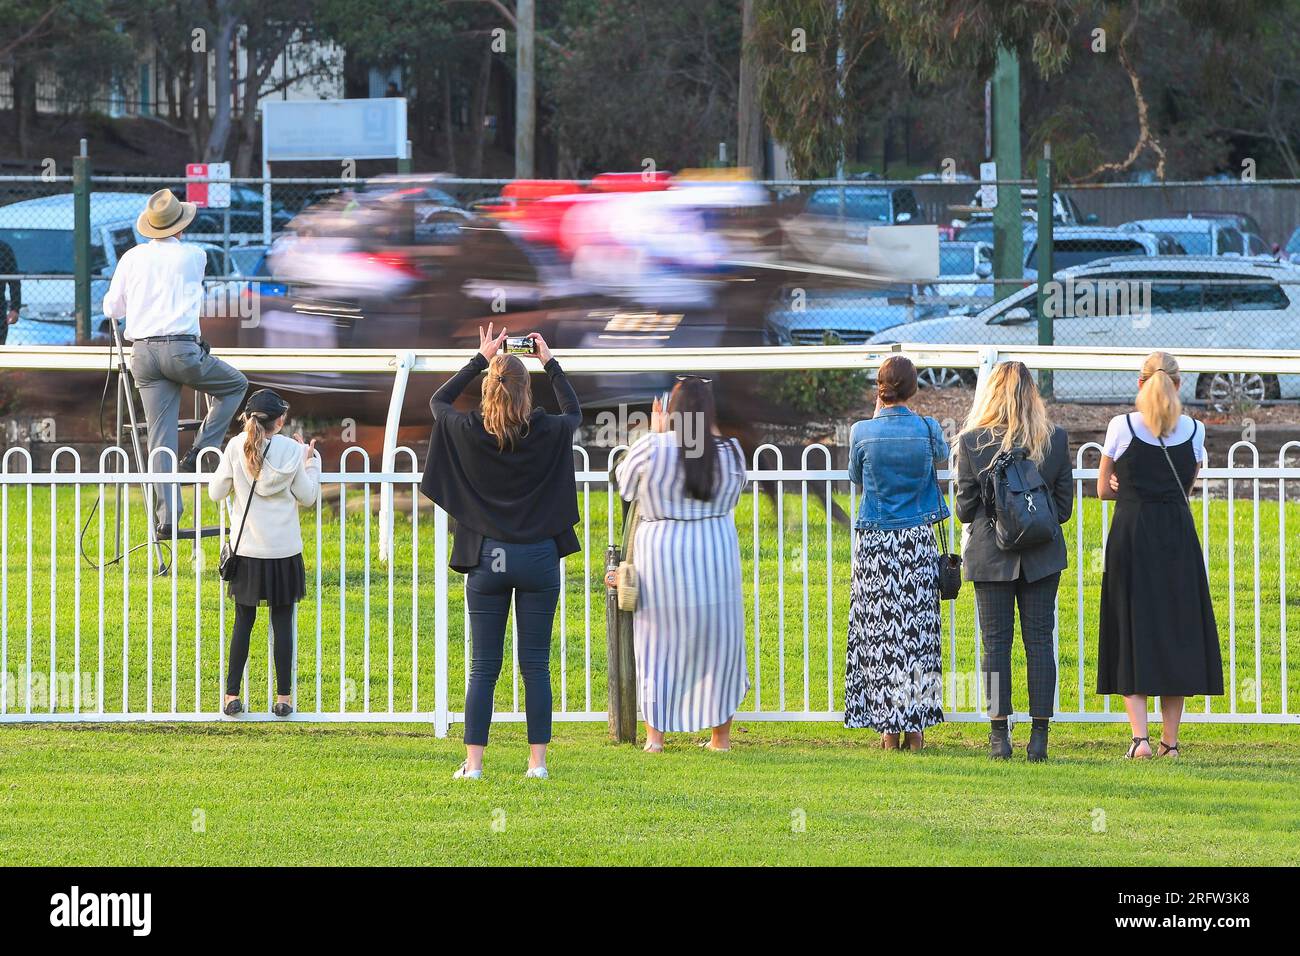 Spectators with mobile phones at the race track watching a horse race start Stock Photo